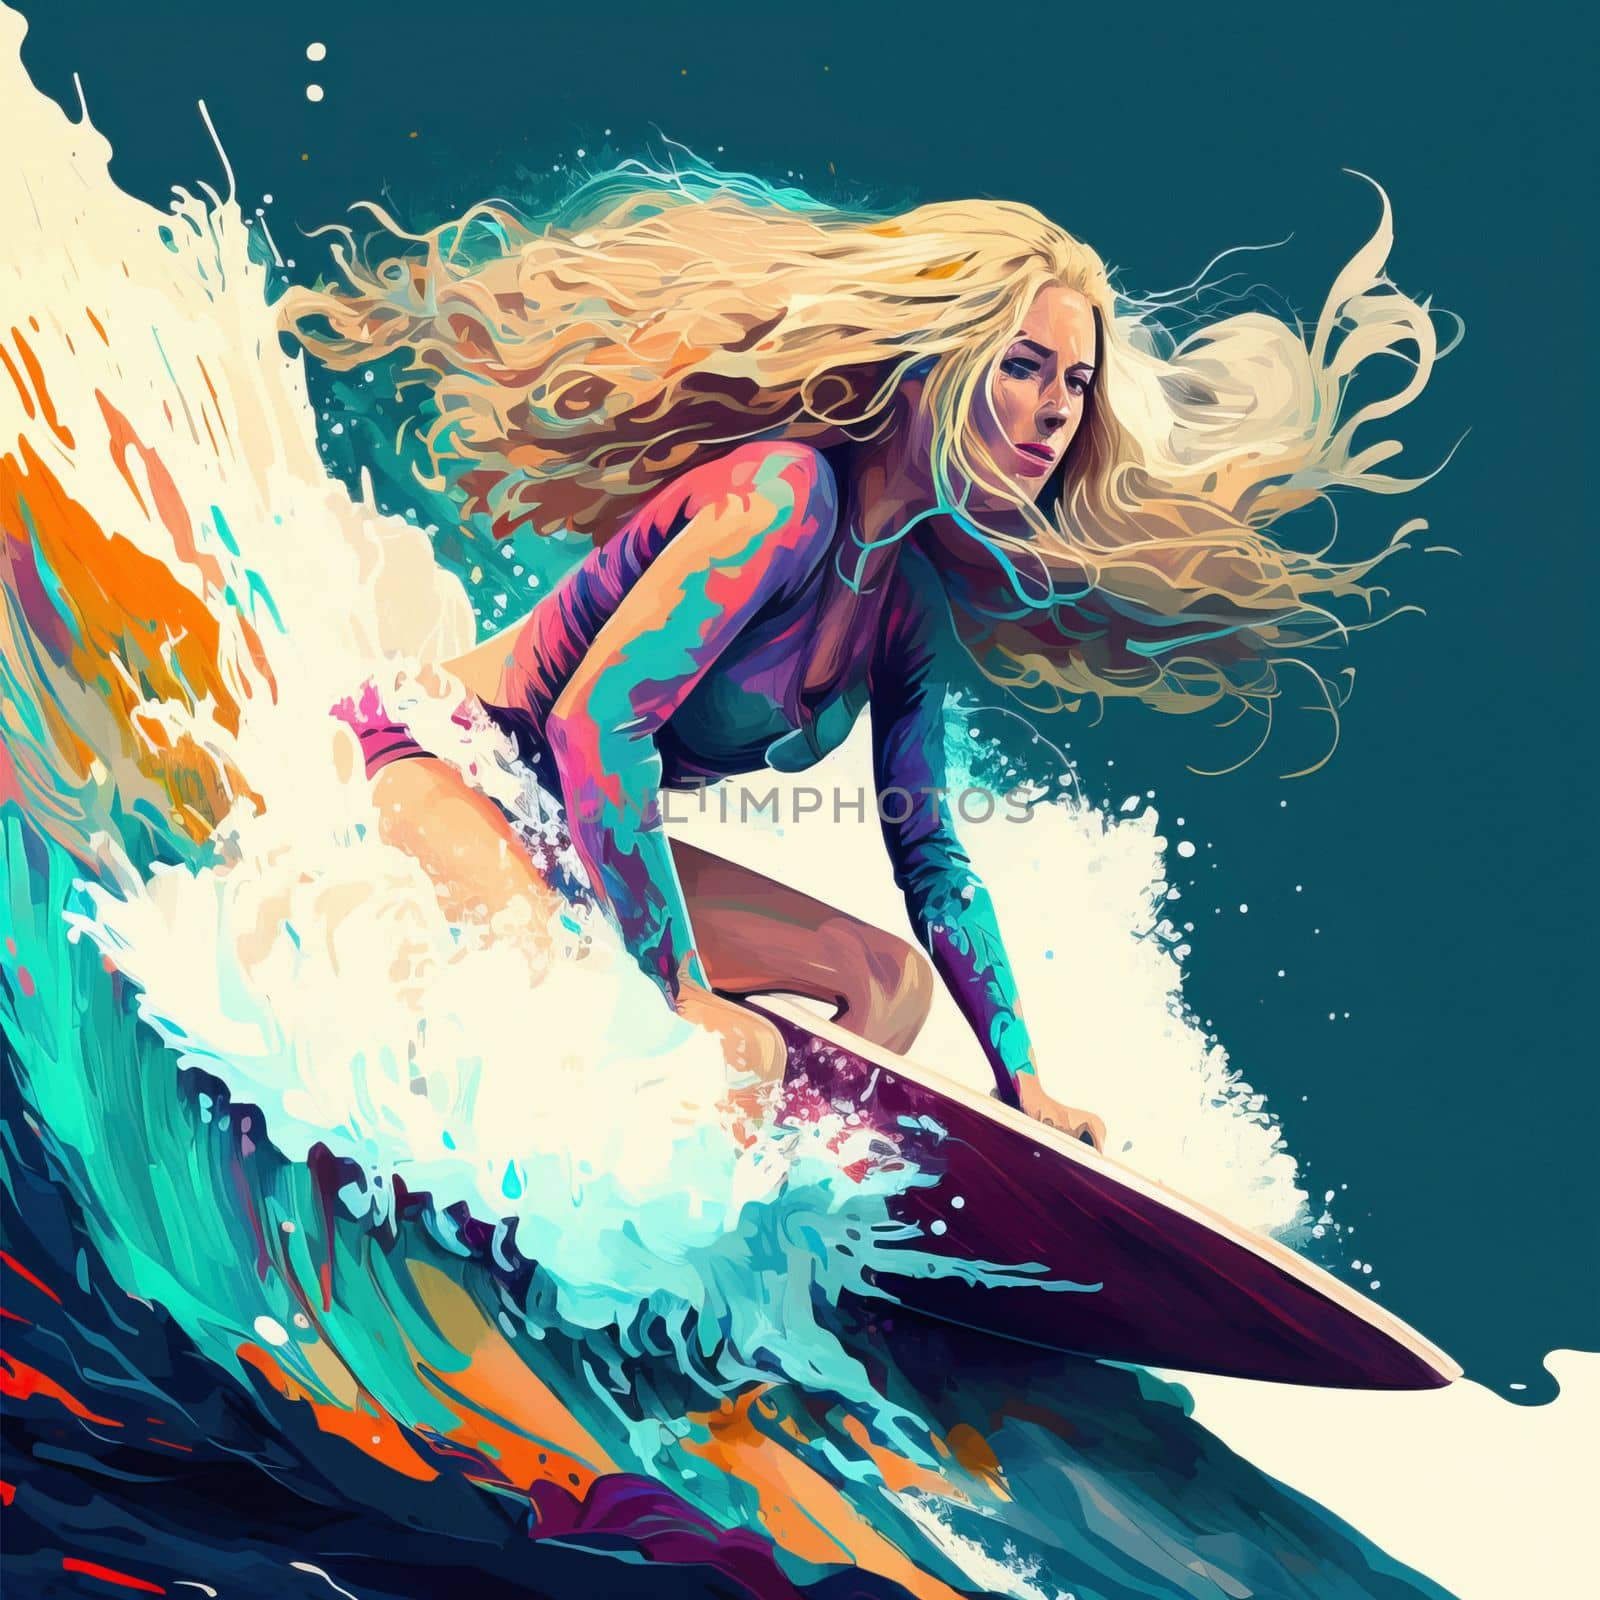 young beautiful woman with long blond hair surfing big wave. Surf girl on surfboard. Woman in ocean during surfing. Surfer and ocean wave. download image